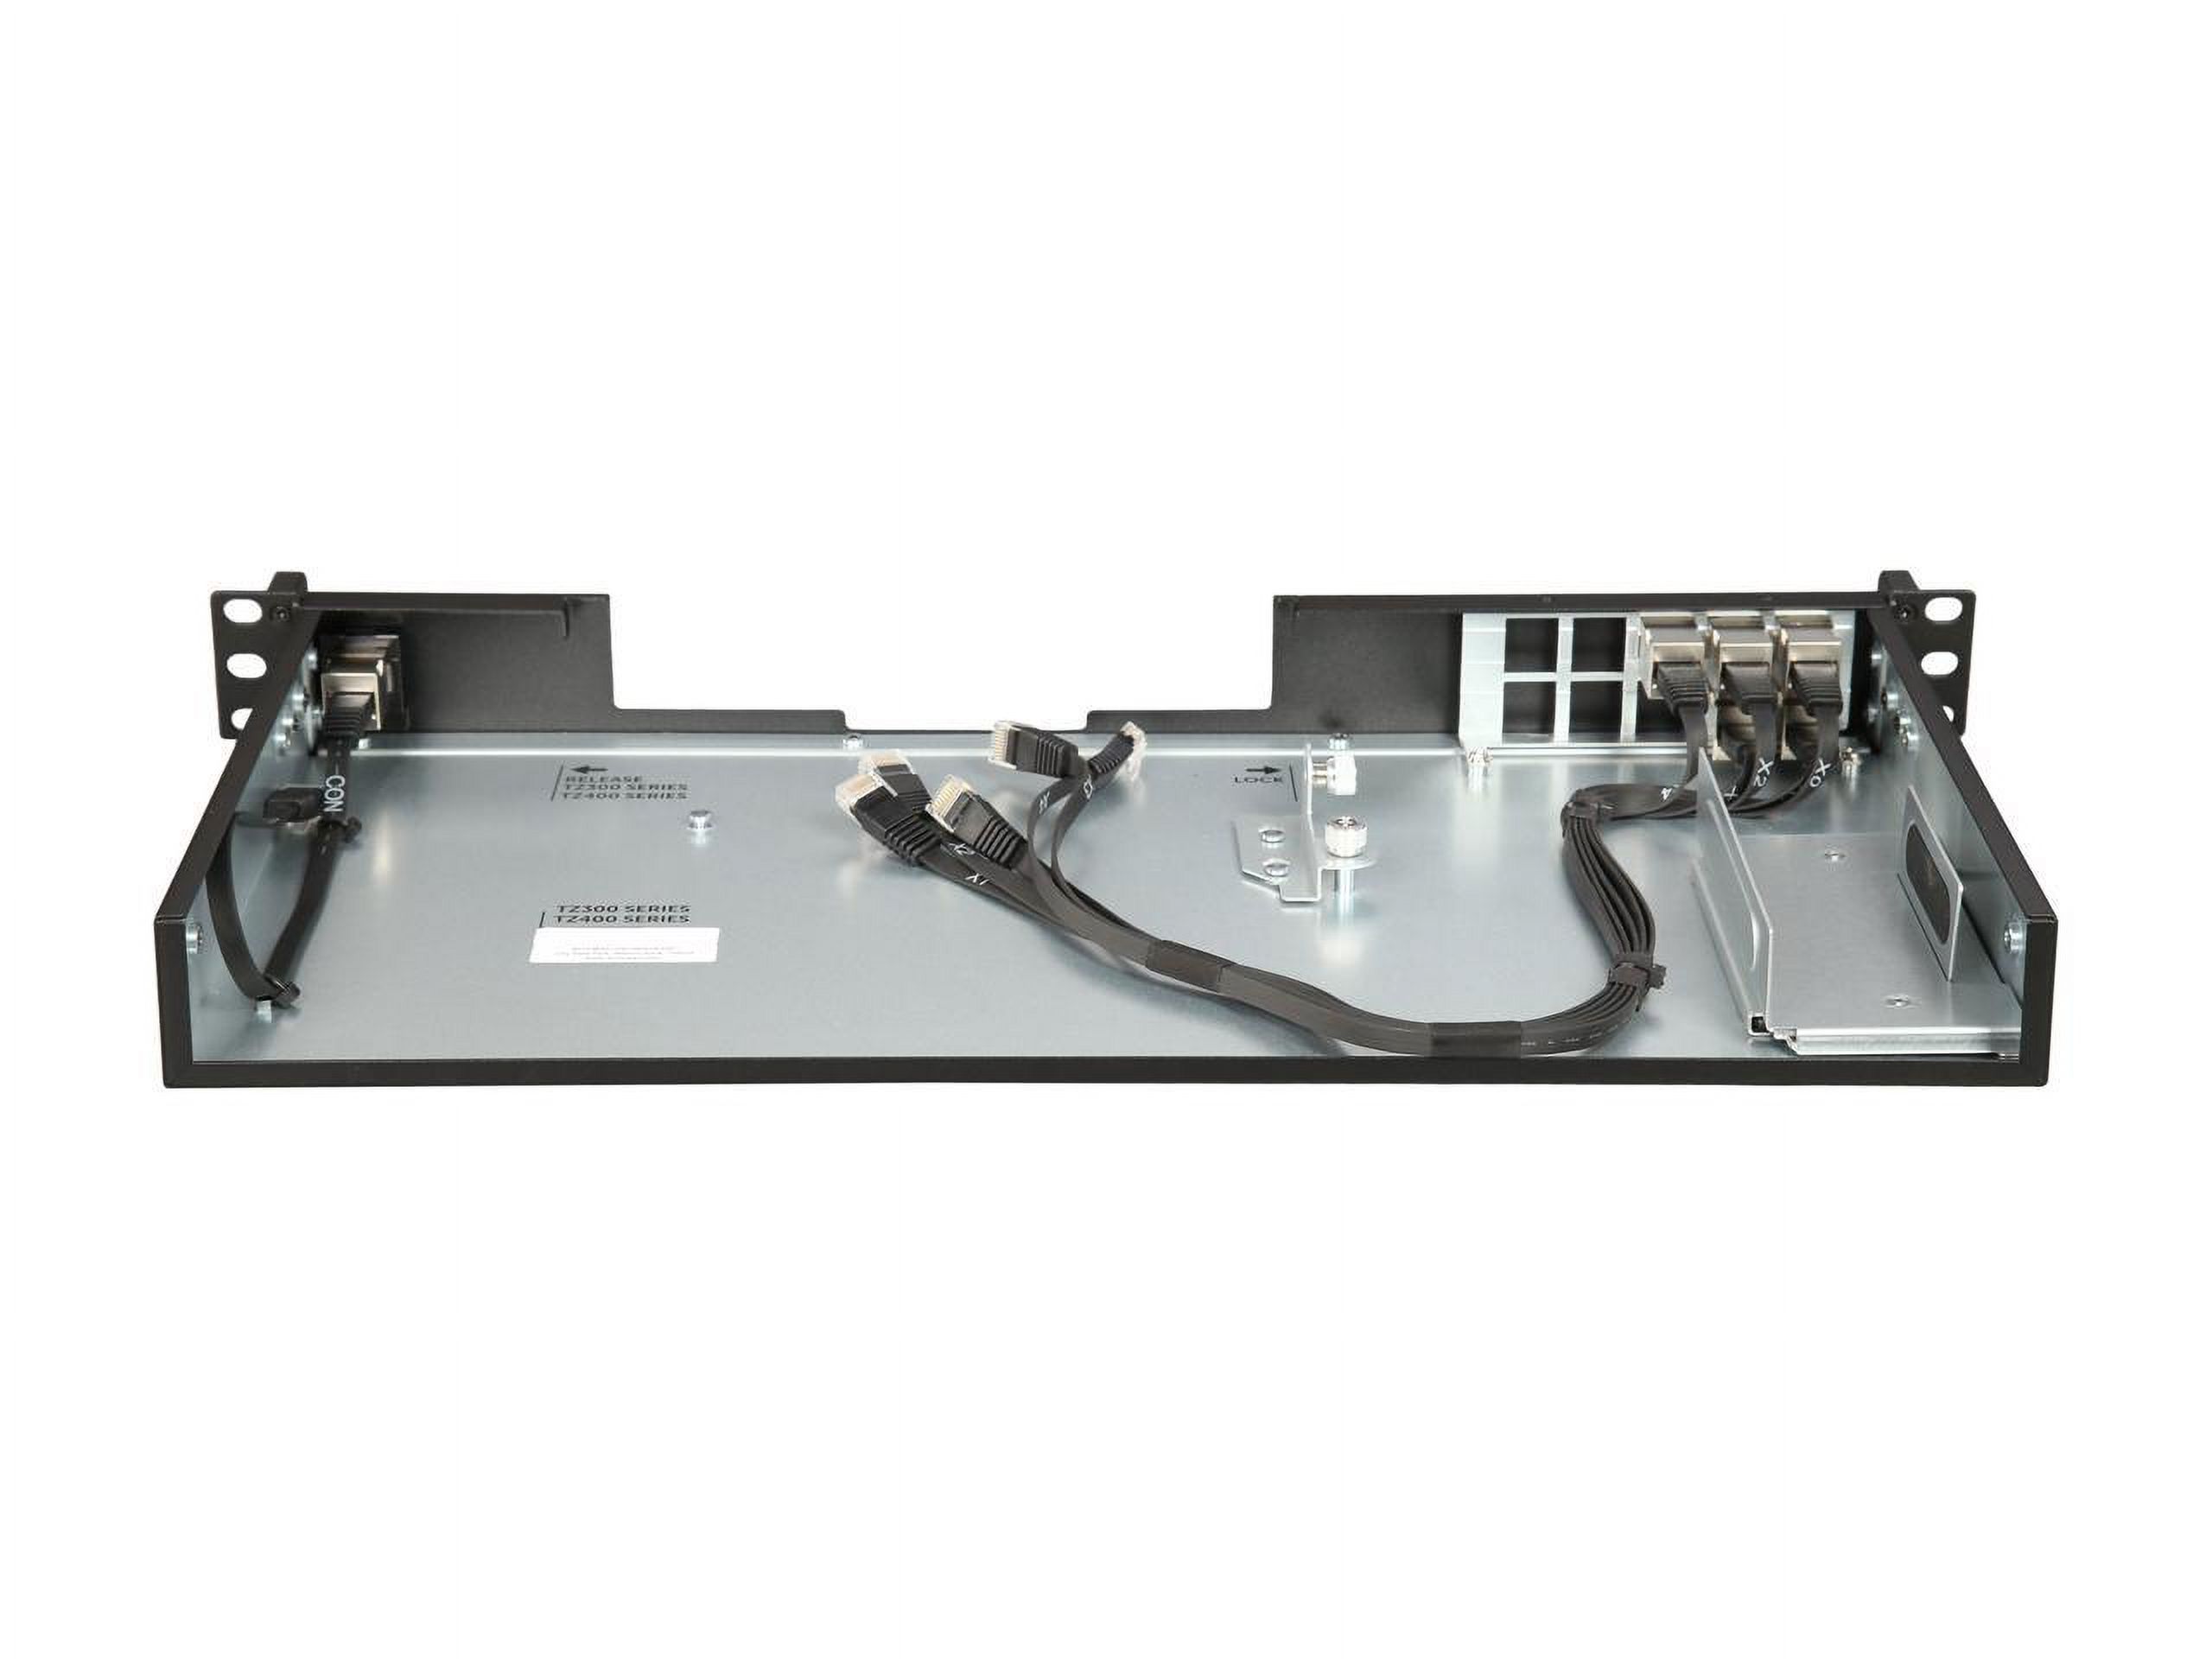 SonicWall 01-SSC-0742 TZ 300 Series Rack Mount Kit - image 4 of 5